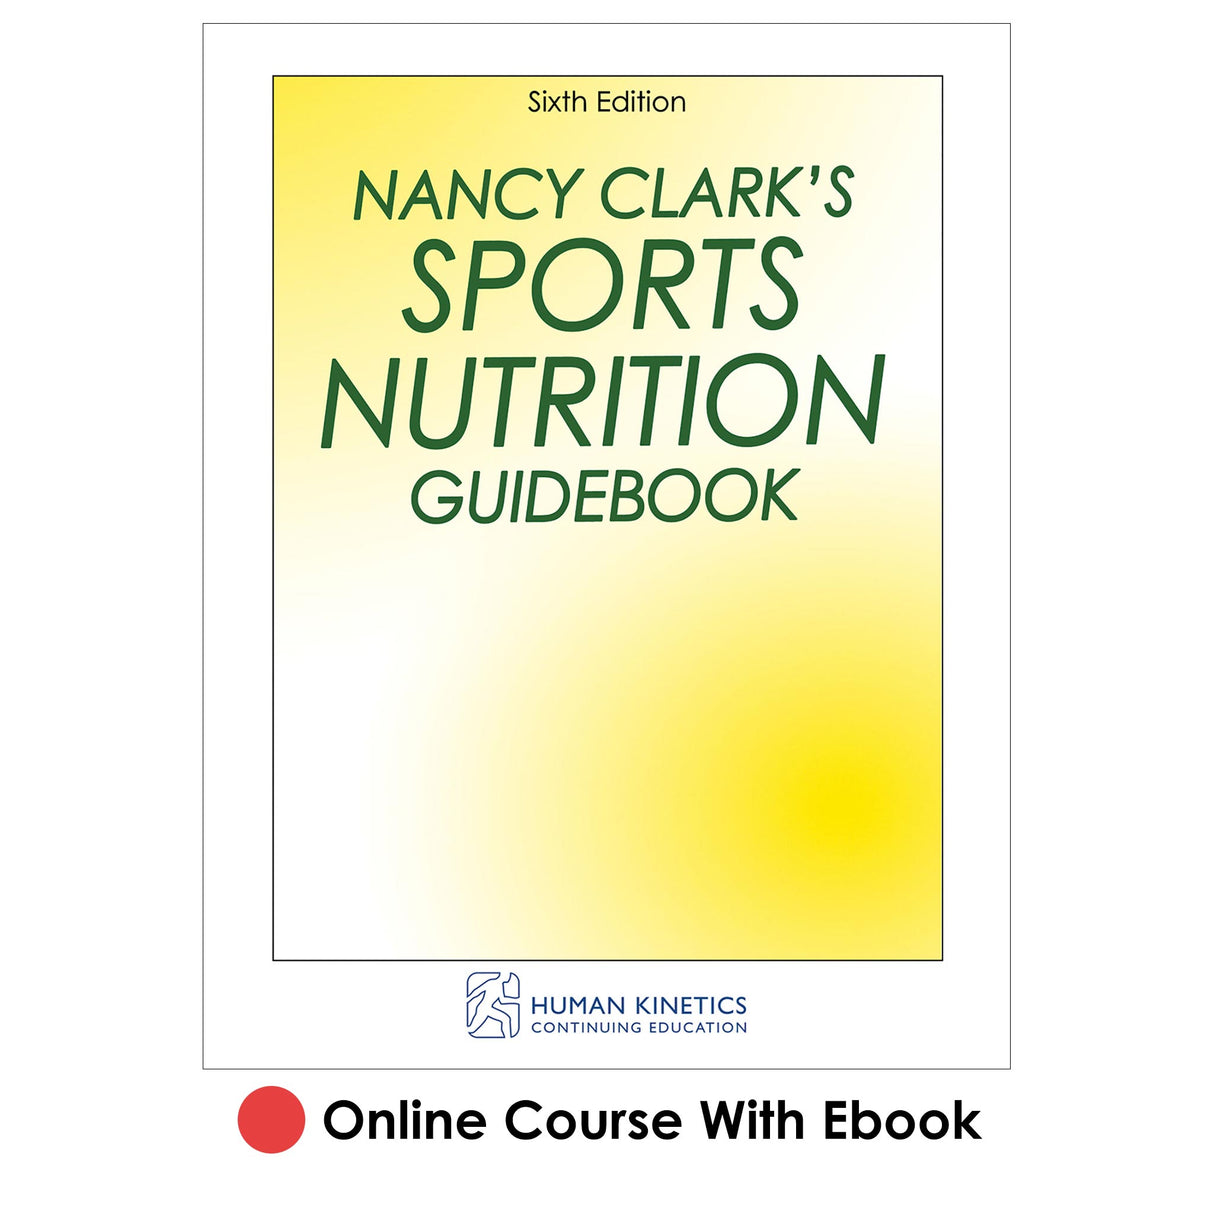 Nancy Clark's Sports Nutrition Guidebook 6th Edition Online CE Course With Ebook